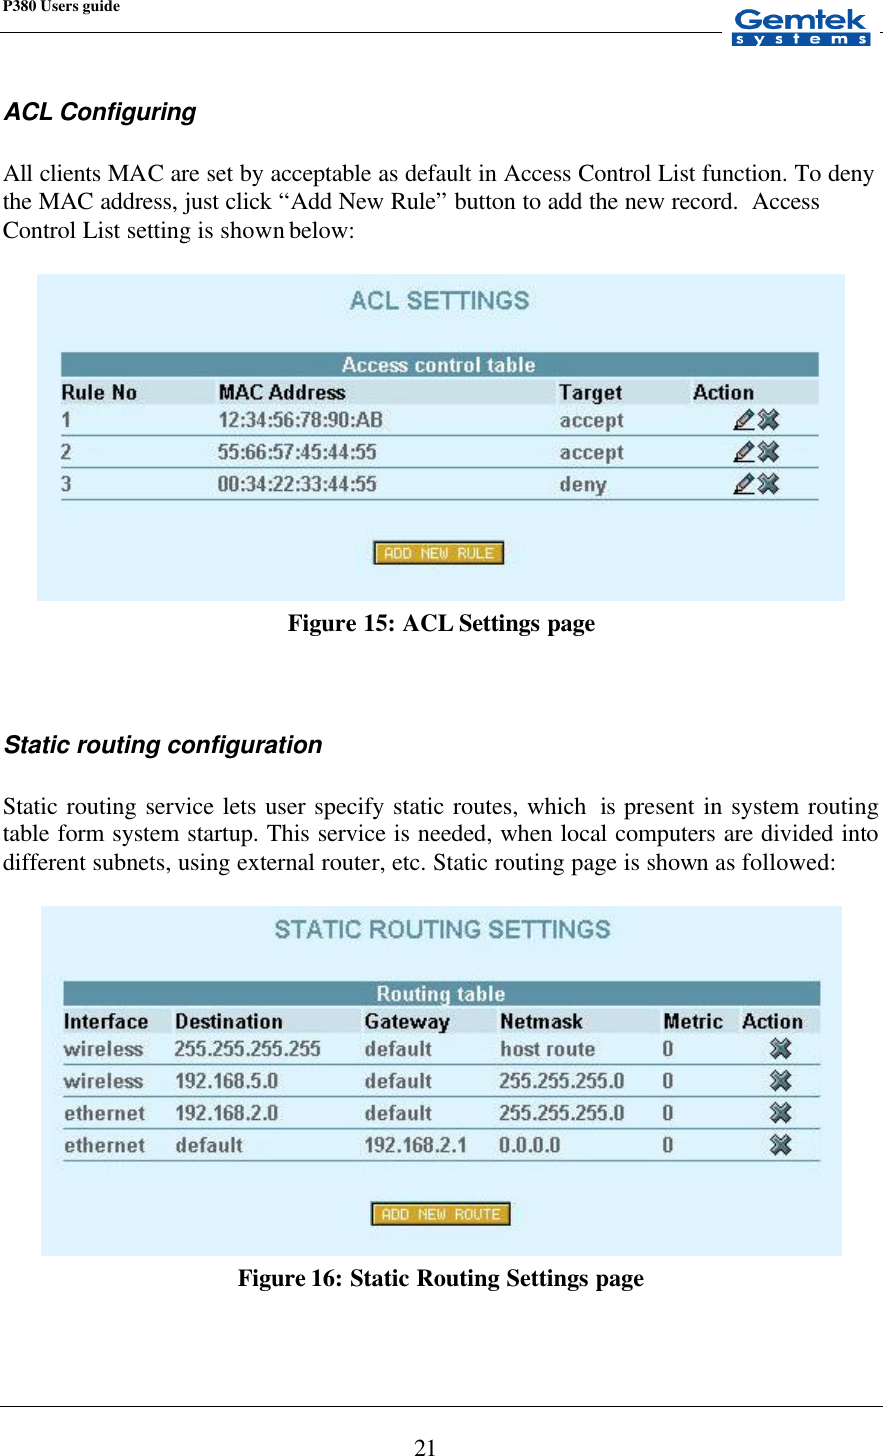 P380 Users guide            21 ACL Configuring  All clients MAC are set by acceptable as default in Access Control List function. To deny the MAC address, just click “Add New Rule” button to add the new record.  Access Control List setting is shown below:   Figure 15: ACL Settings page   Static routing configuration  Static routing service lets user specify static routes, which  is  present in system routing table form system startup. This service is needed, when local computers are divided into different subnets, using external router, etc. Static routing page is shown as followed:   Figure 16: Static Routing Settings page 